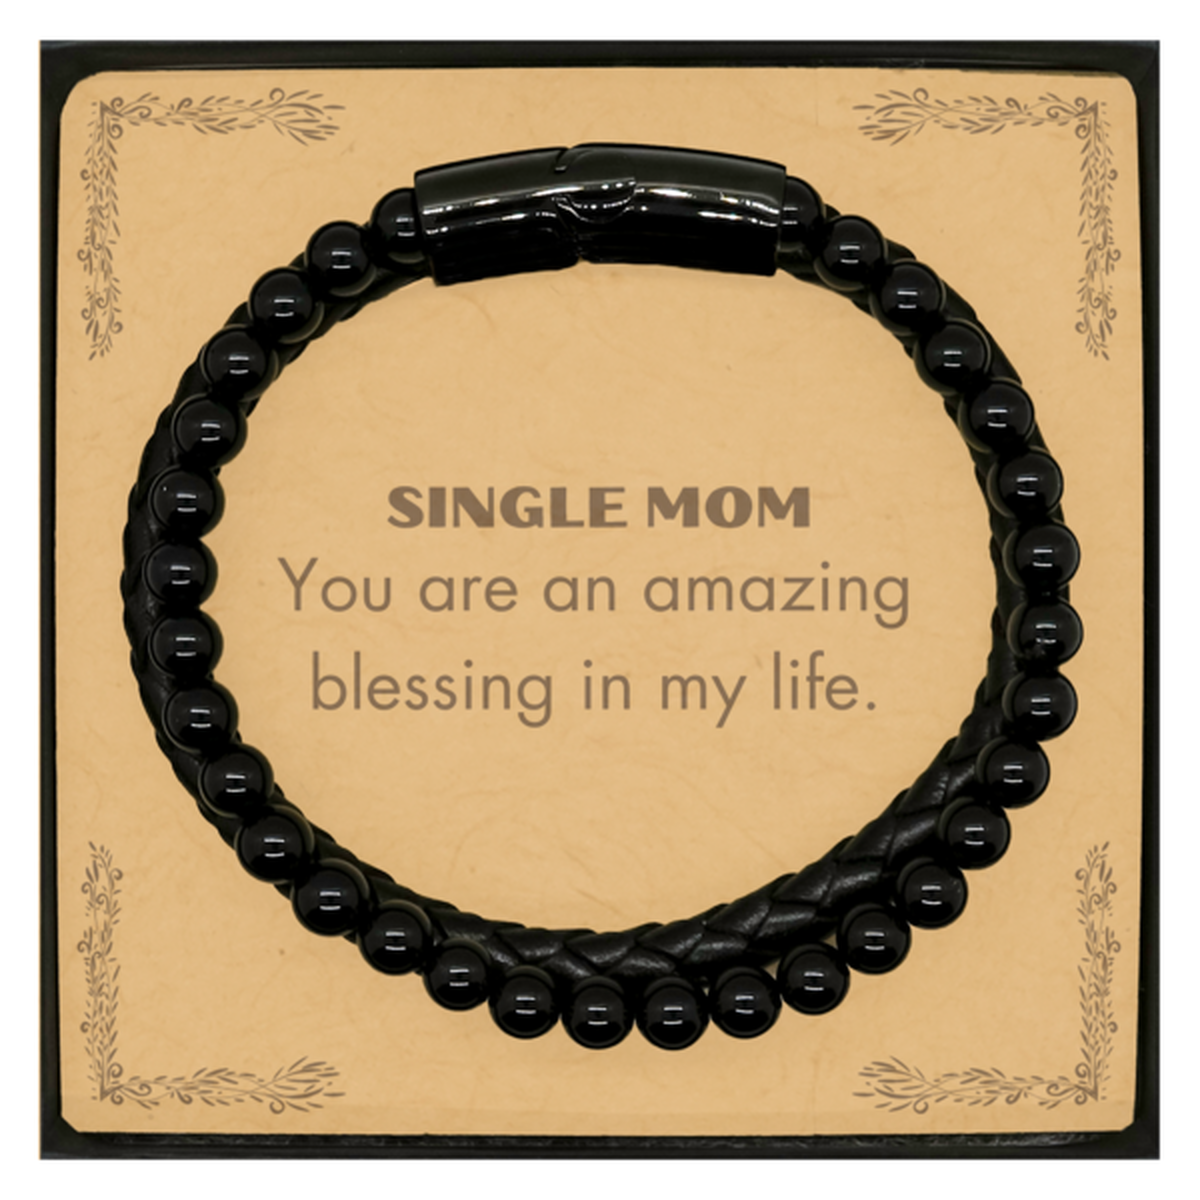 Single Mom Stone Leather Bracelets, You are an amazing blessing in my life, Thank You Gifts For Single Mom, Inspirational Birthday Christmas Unique Gifts For Single Mom